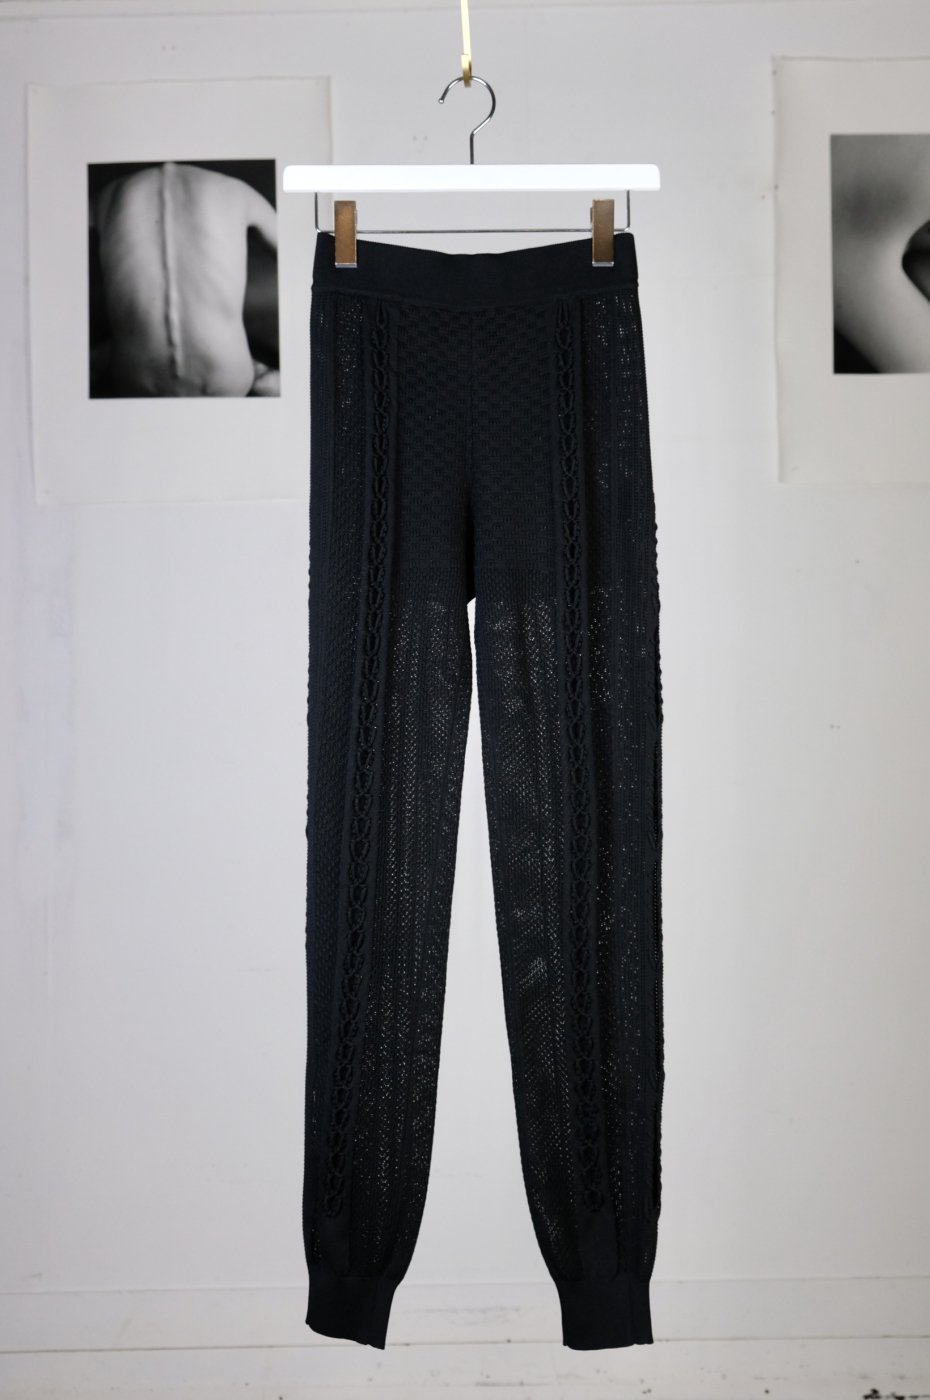 <img class='new_mark_img1' src='https://img.shop-pro.jp/img/new/icons8.gif' style='border:none;display:inline;margin:0px;padding:0px;width:auto;' />Mame Kurogouchi-OPENWORK LACE UP KNITTED TROUSERS-BLACK